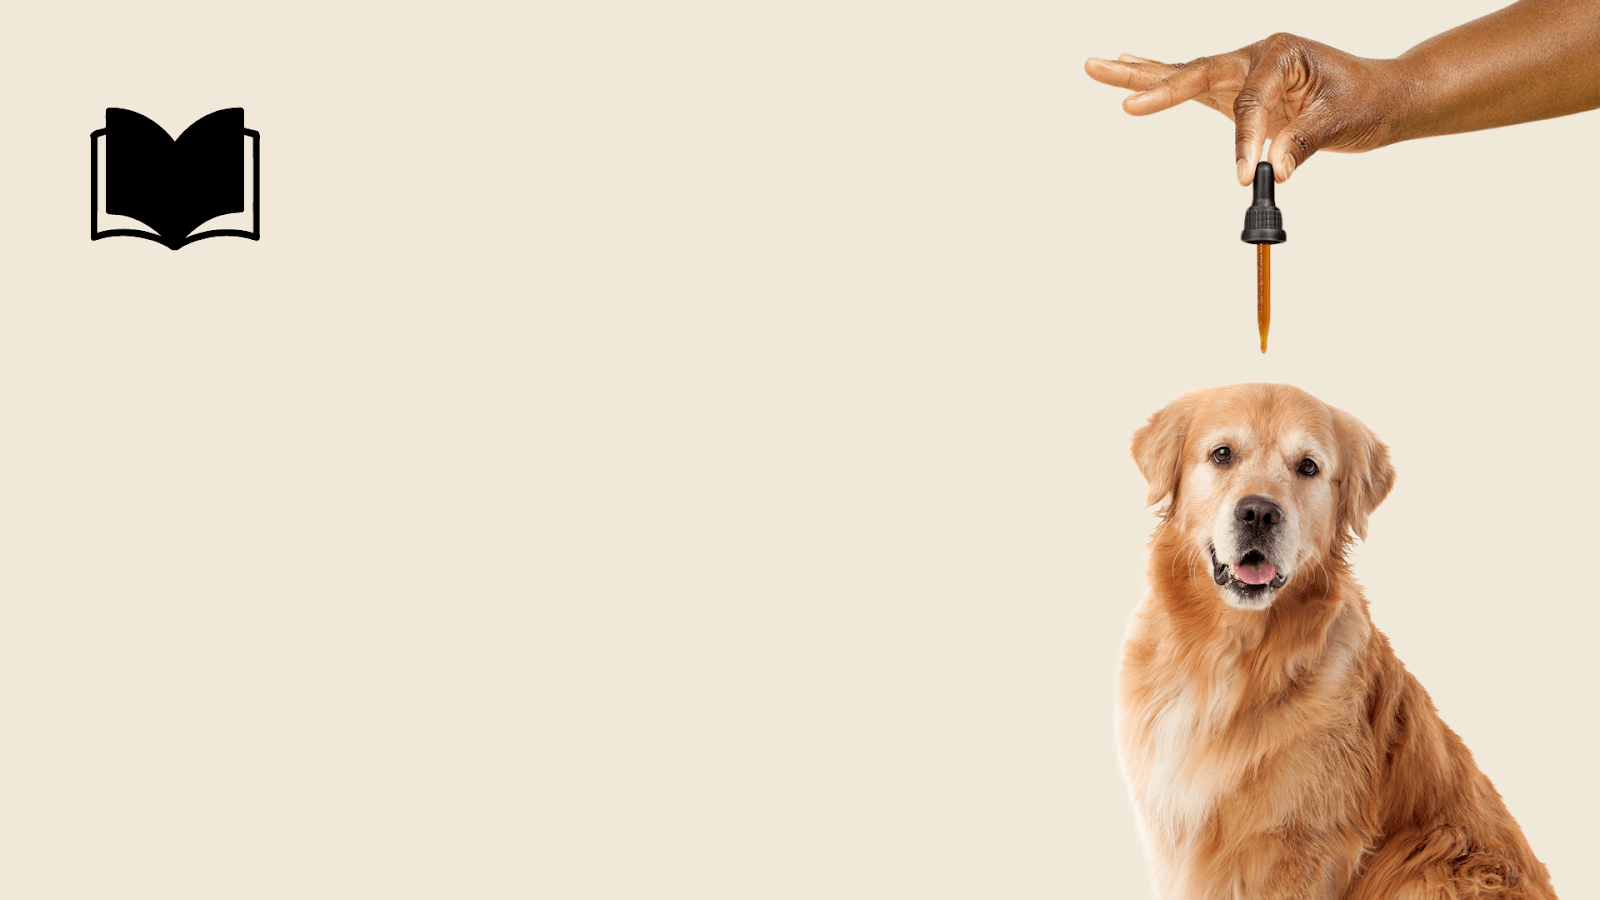 How To Give CBD Oil To Dogs: A Step-By-Step Guide